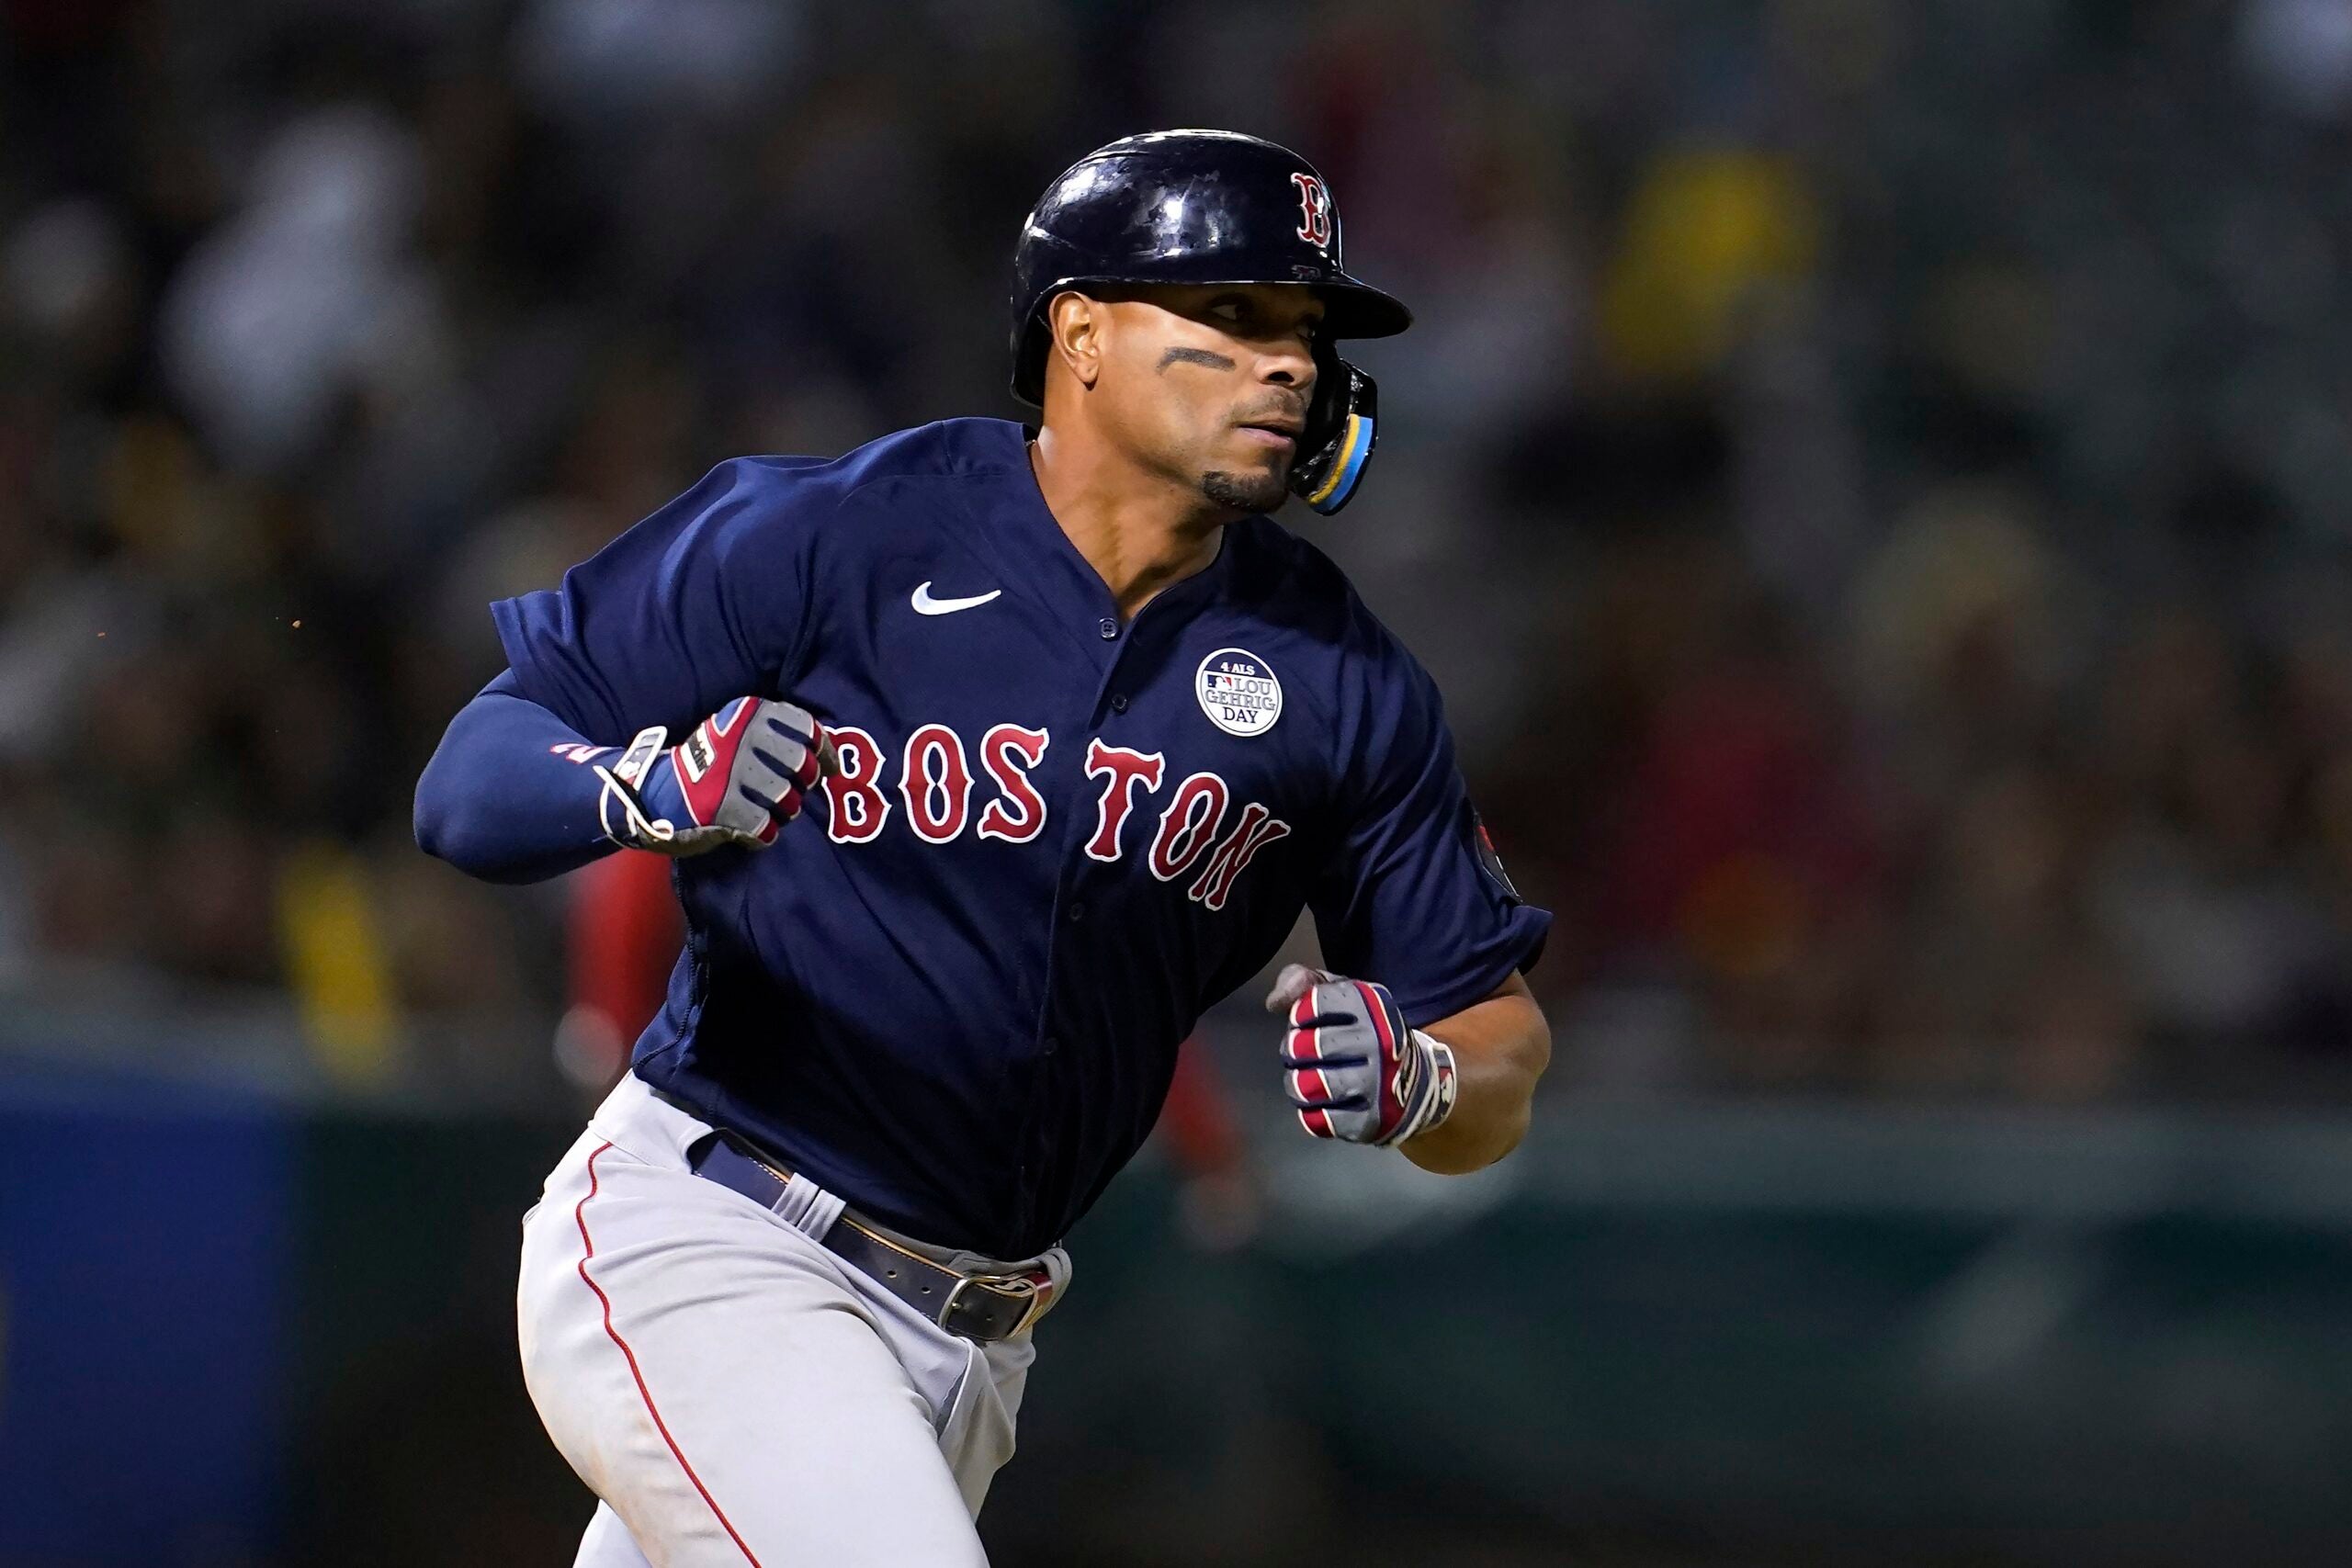 Ranking the top 10 freeagent shortstops in a starstudded offseason class   The Athletic